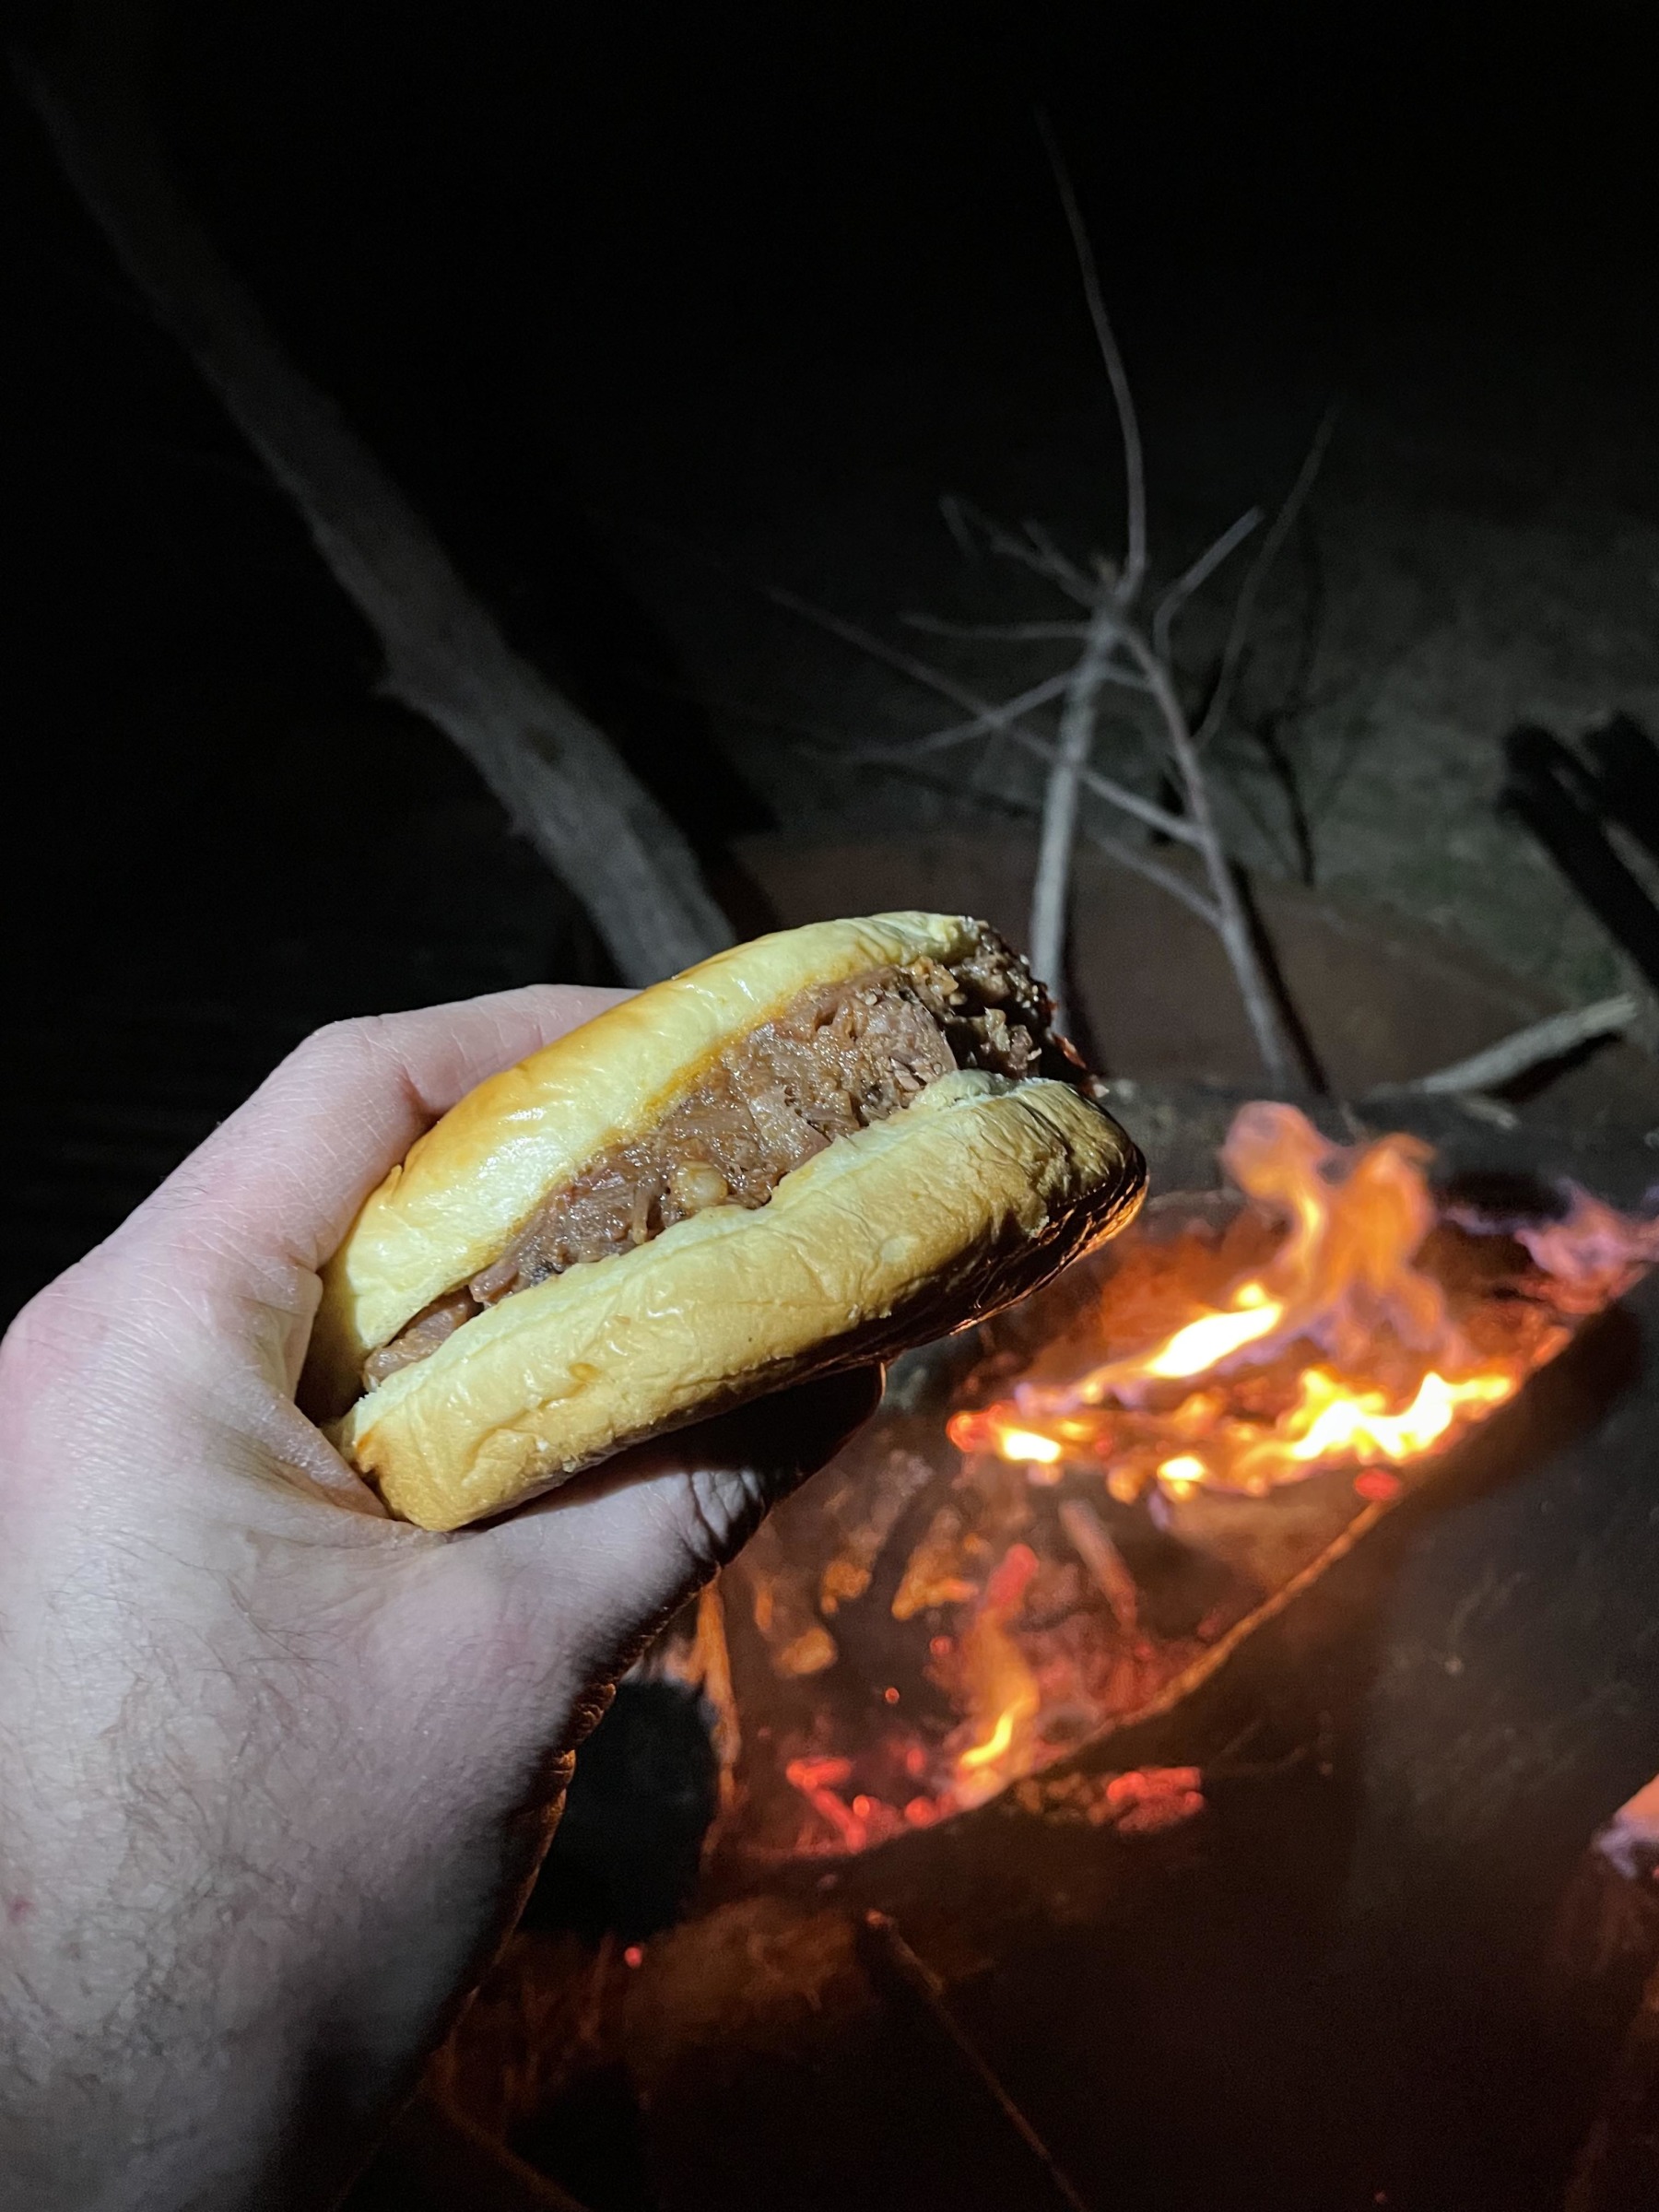 Smoked Brisket by a fire – it wasn’t all bad.